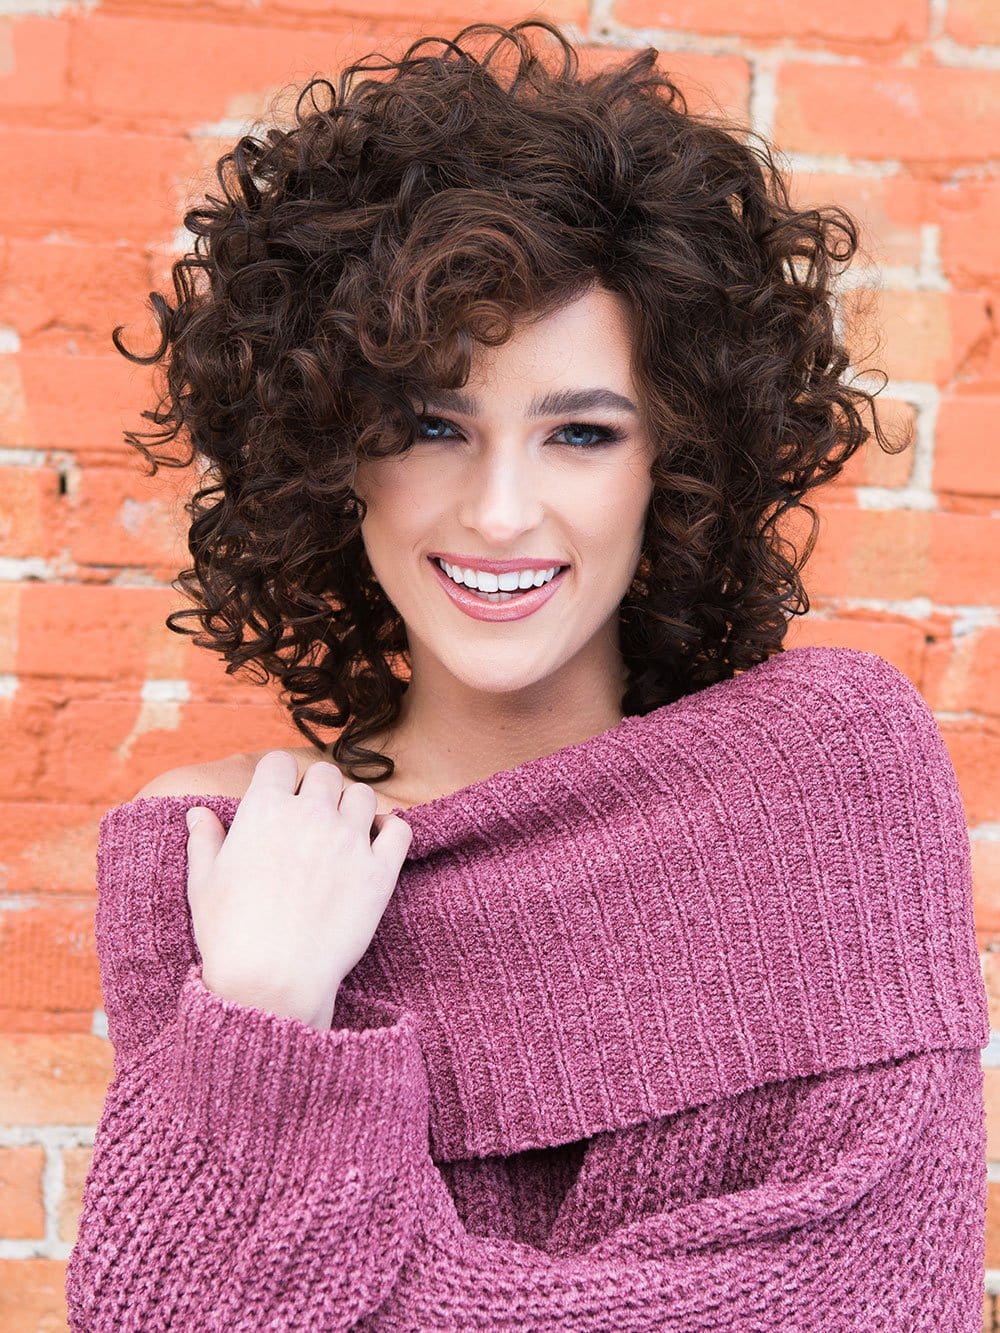 Jamila Plus by Ellen Wille is lavish with volume, body and beautiful curls